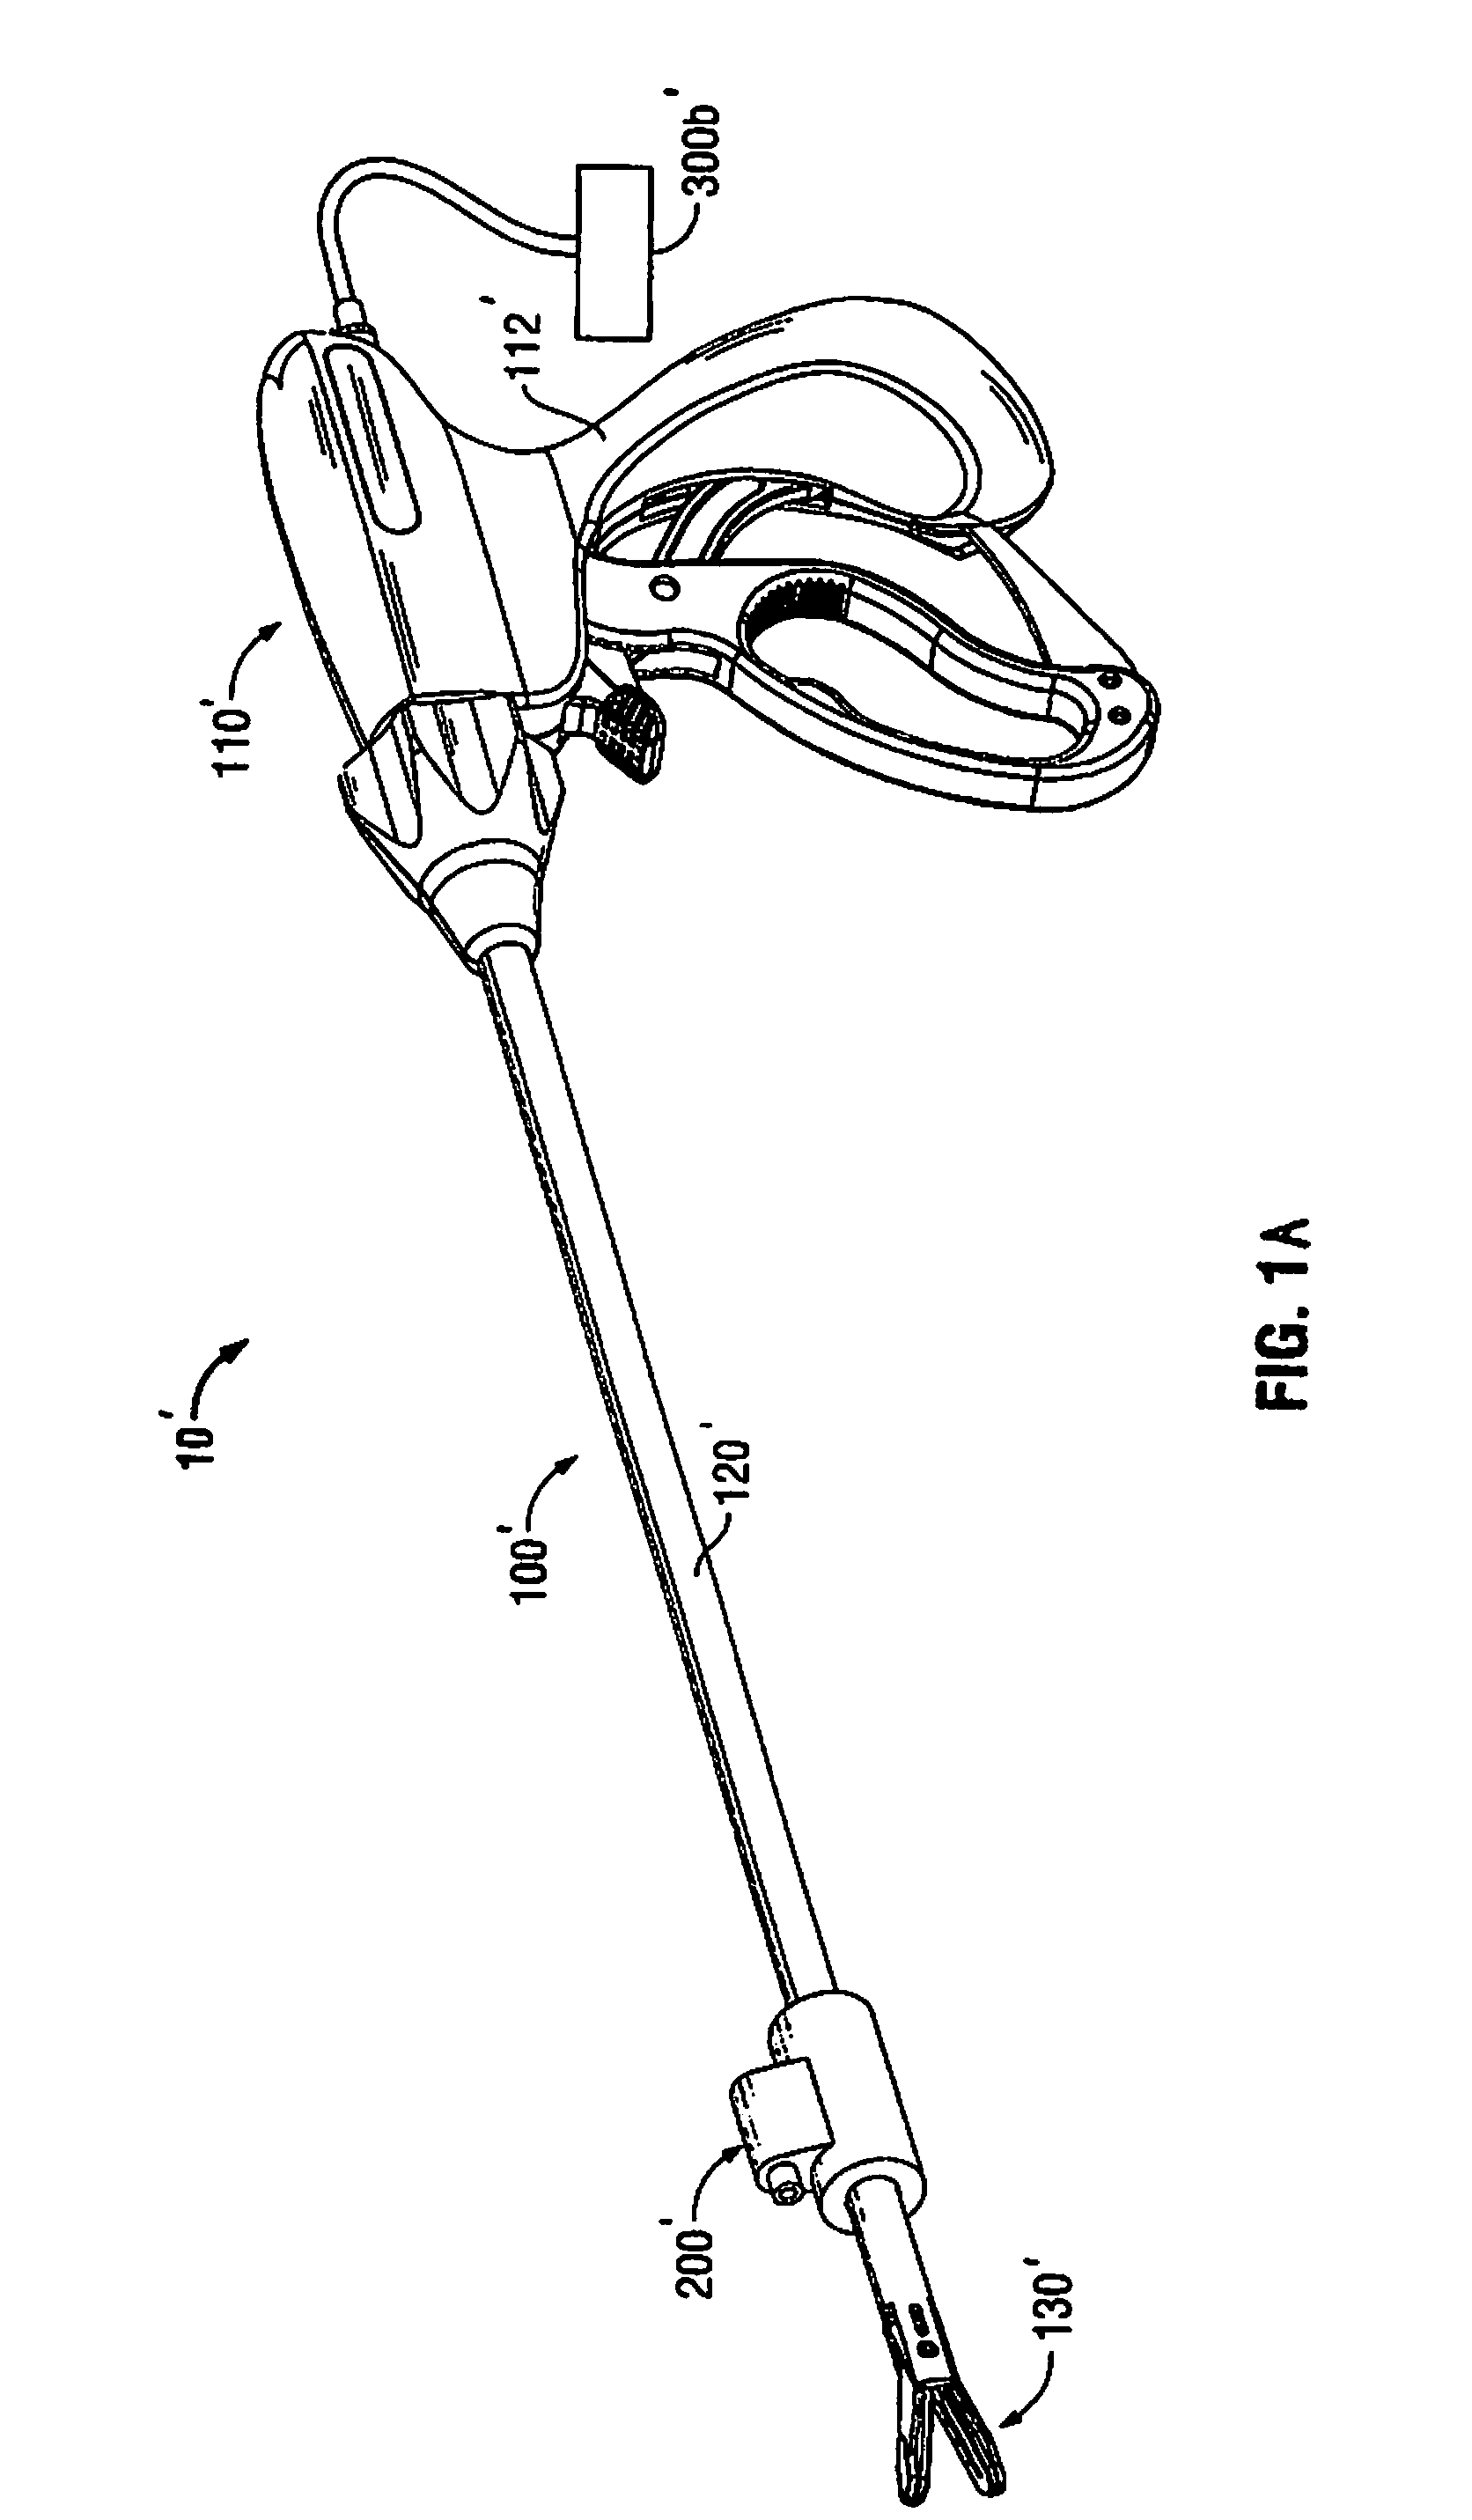 Surgical instrument including inductively coupled accessory